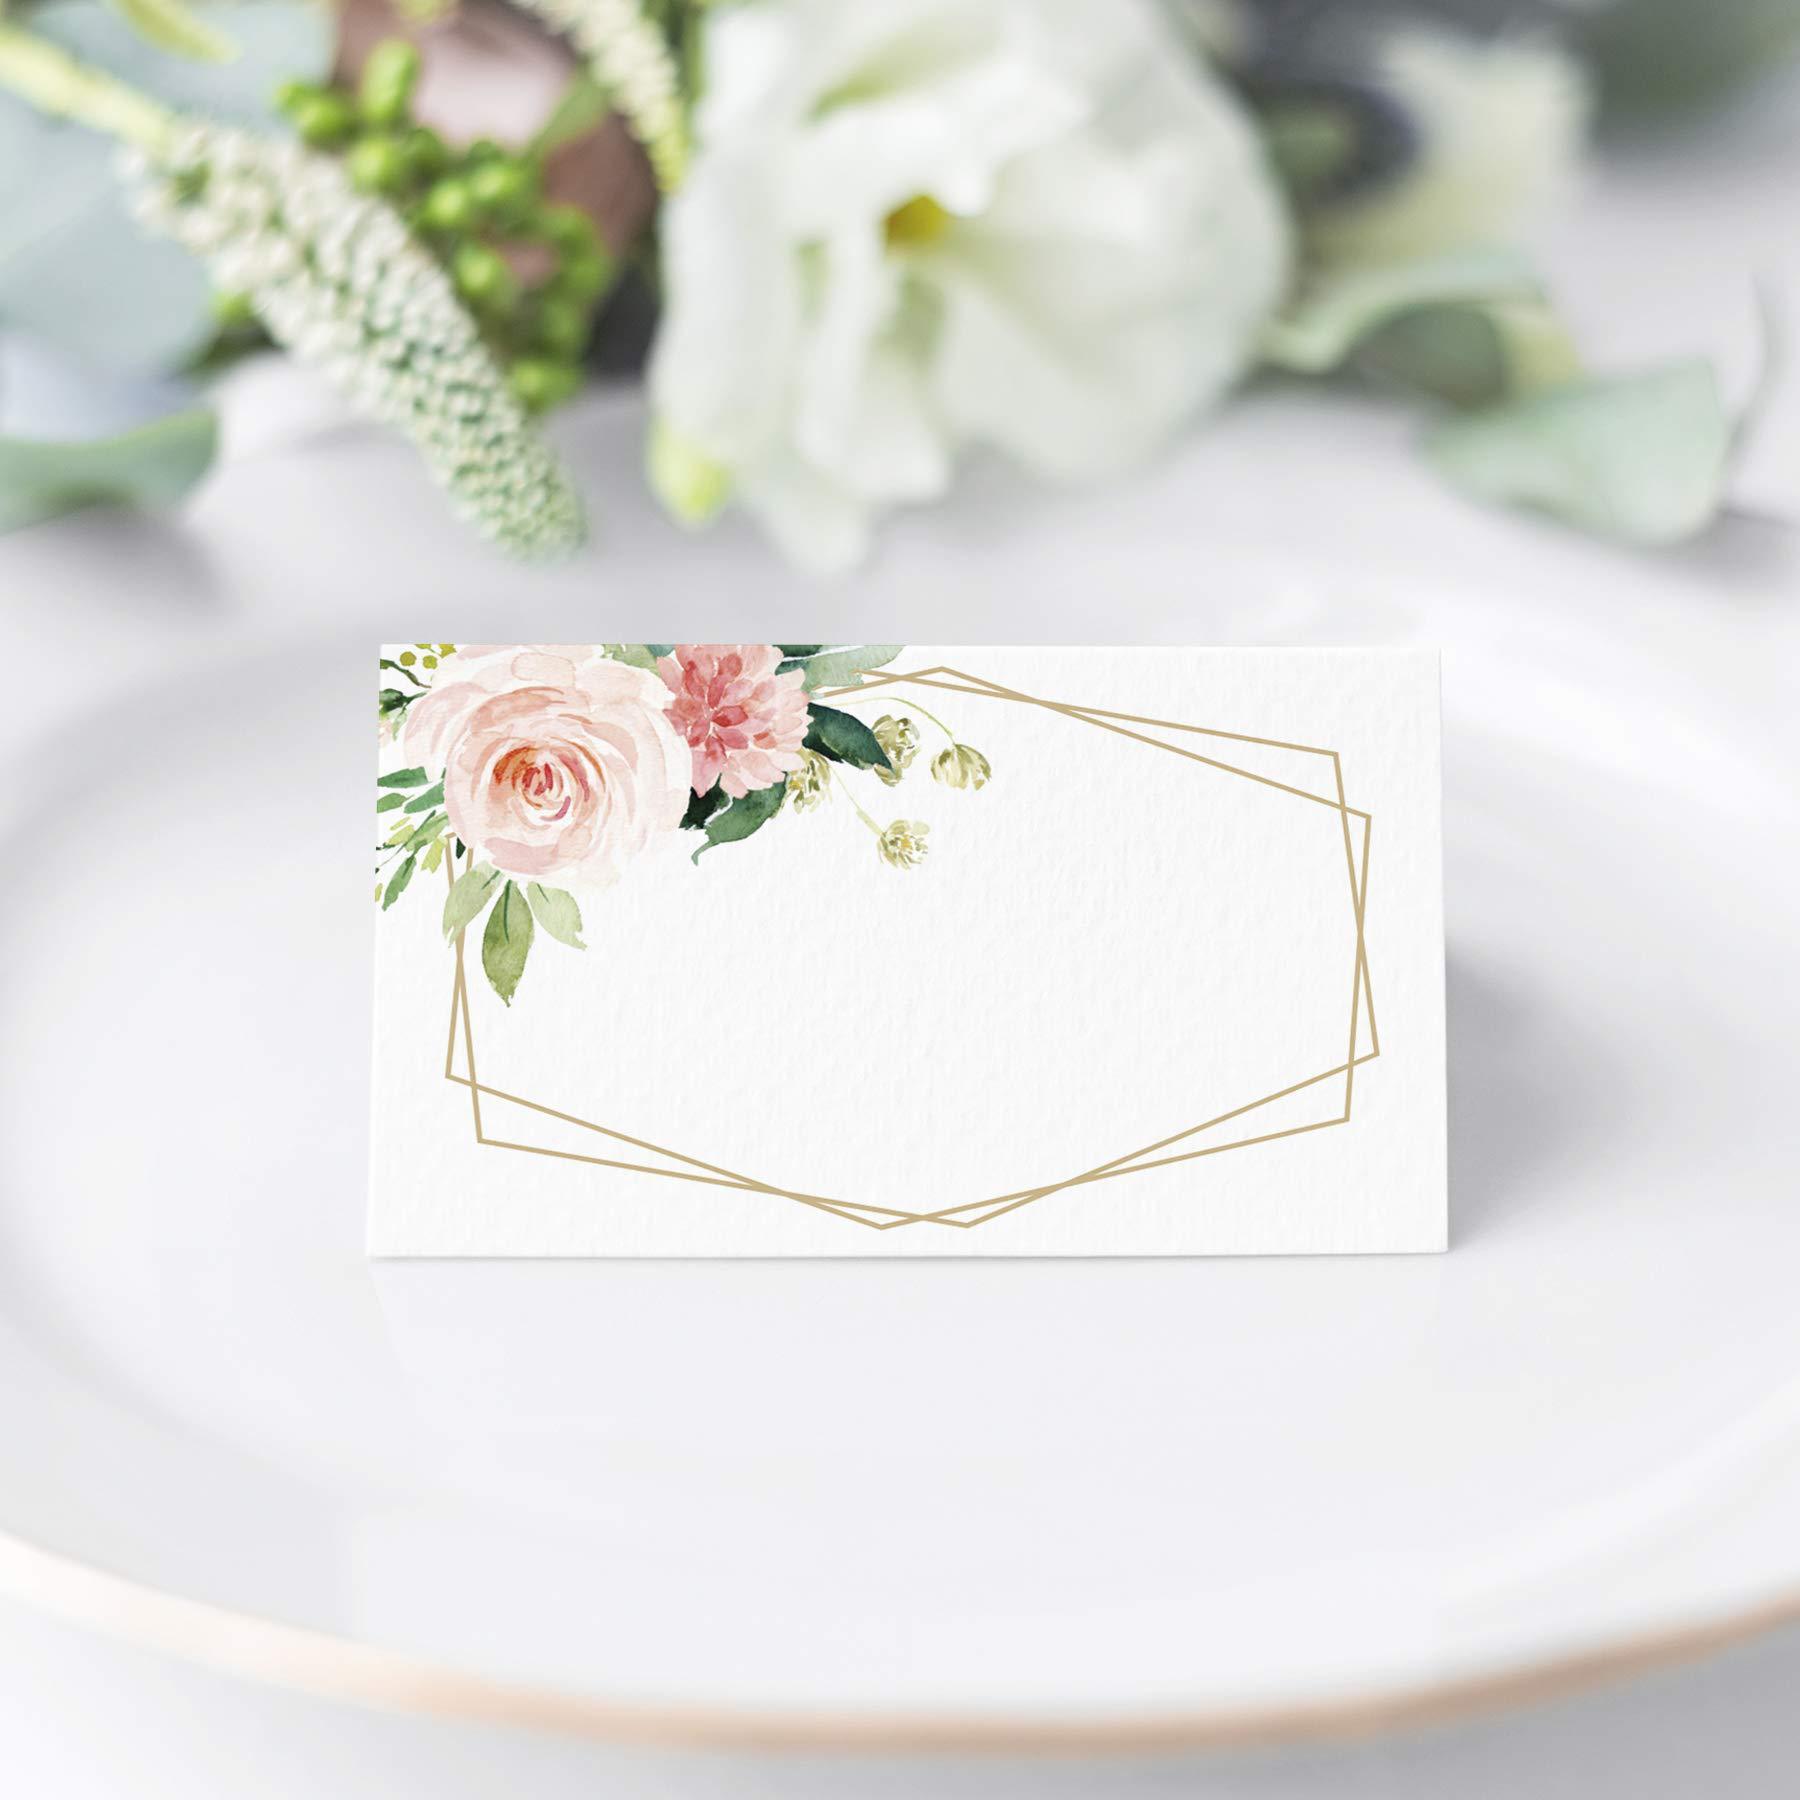 

Elegant Watercolor Floral Place Cards - 25/10 Piece, Pink Rose Design For Weddings & Events, Writeable Folding Seating Cards From Casual Gatherings To Luxe Weddings: Perfect For Any Occasion